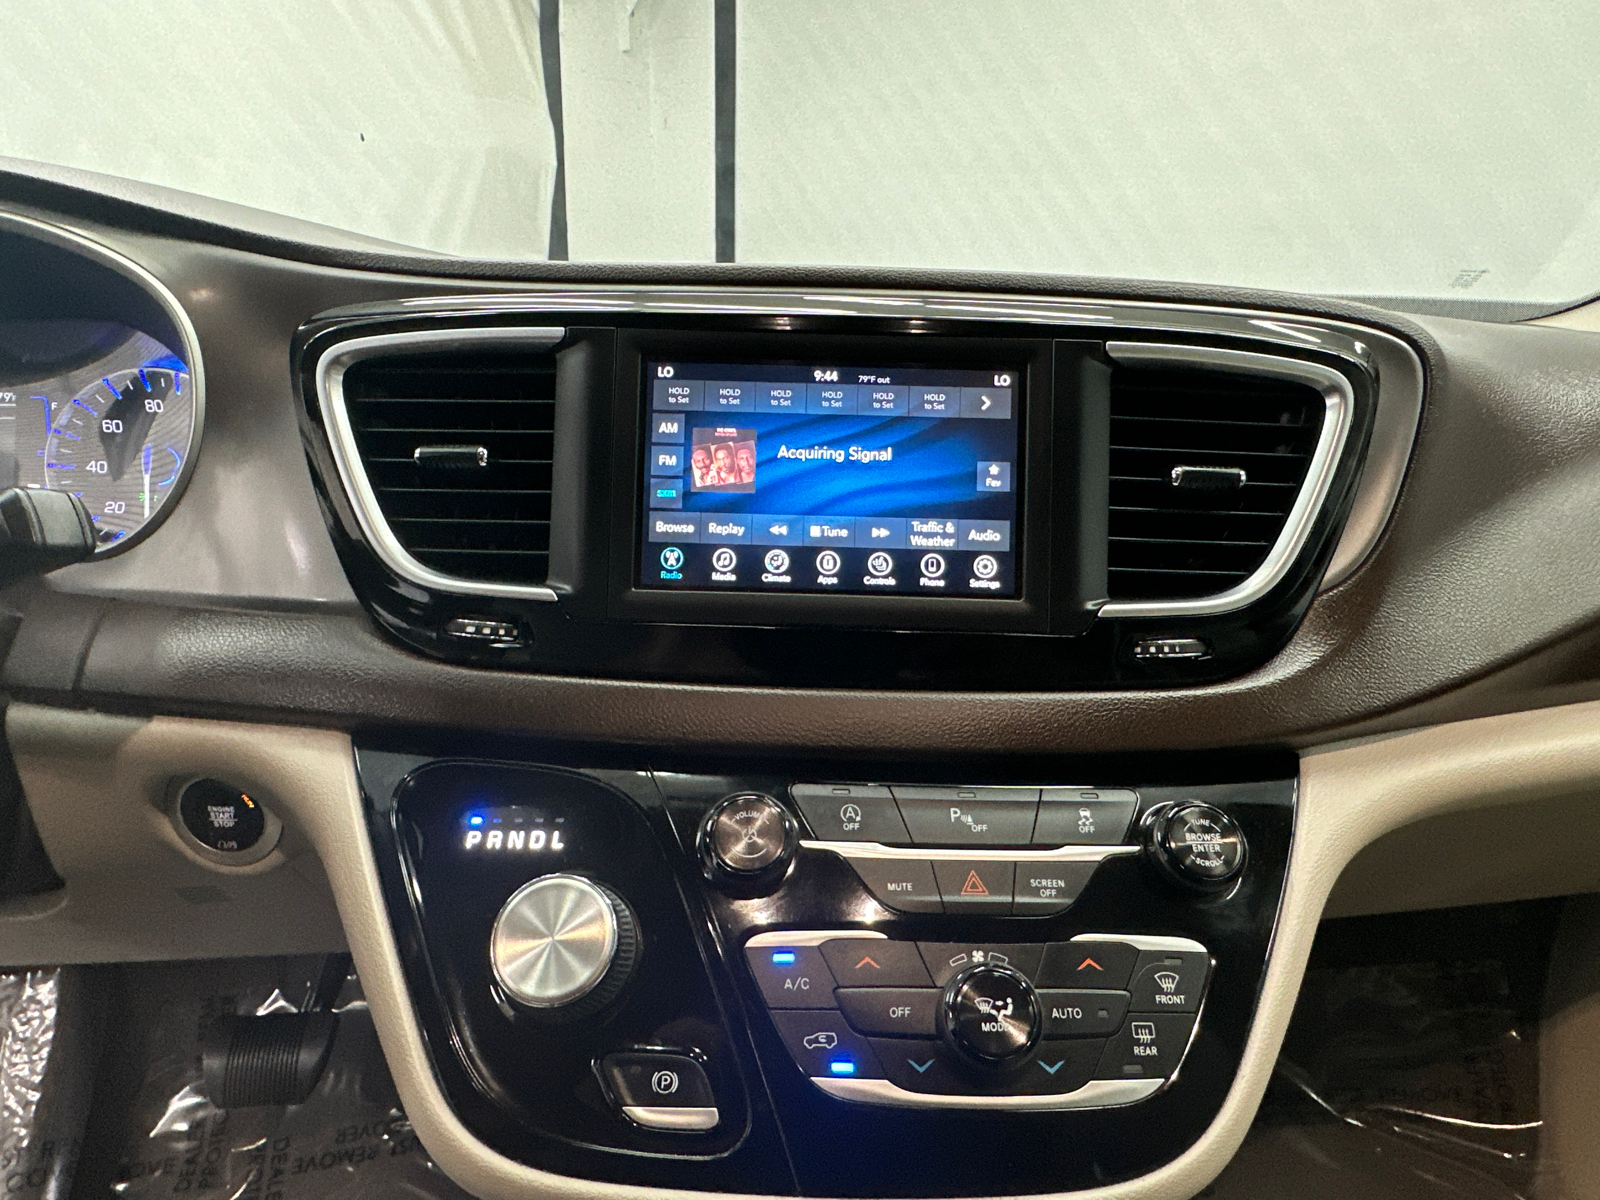 2018 Chrysler Pacifica Touring L 28